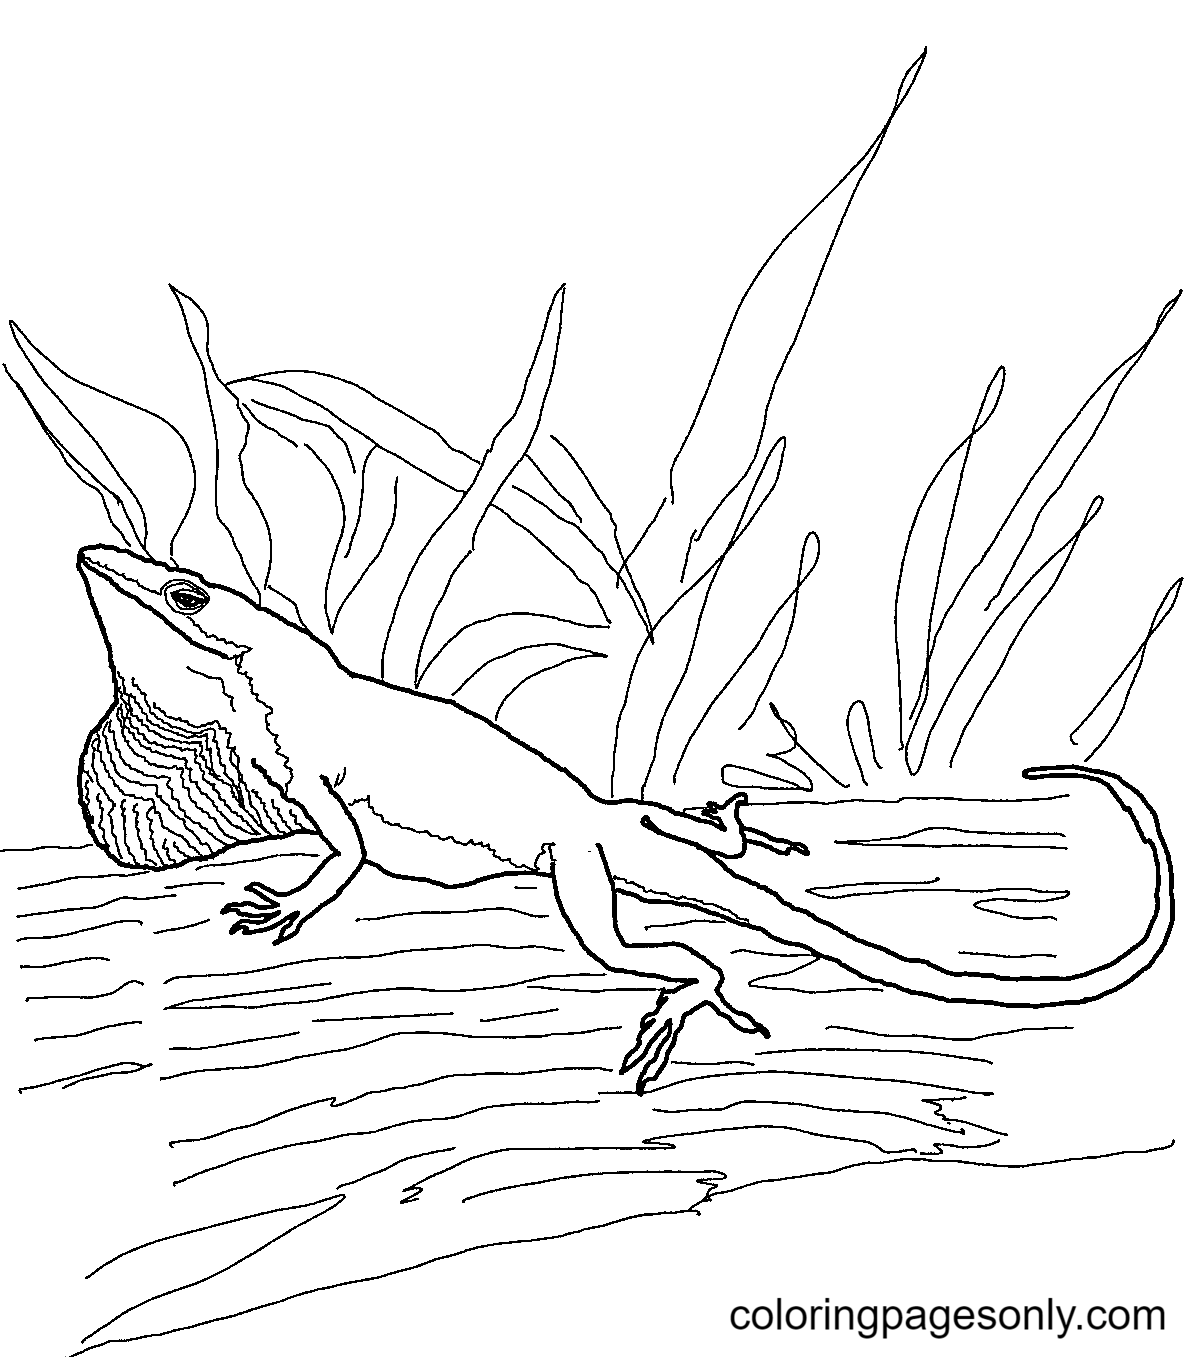 Green Anole Lizard Coloring Page